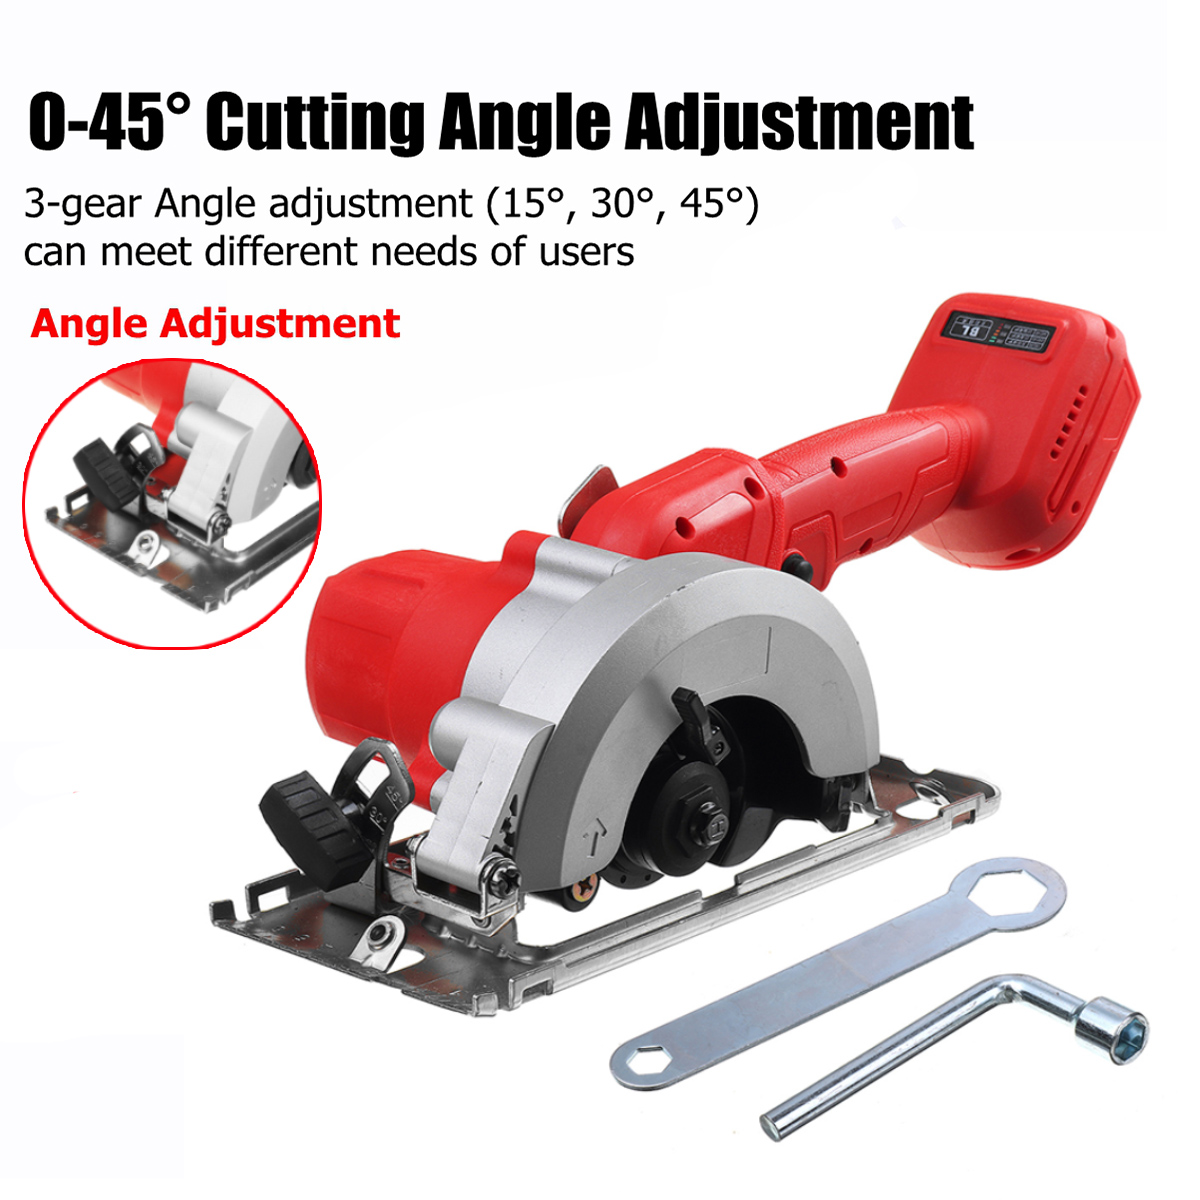 1580W-Cordless-Electric-Circular-Saw-Portable-Woodworking-Cutter-For-Makita-18V-Battery-1786906-3